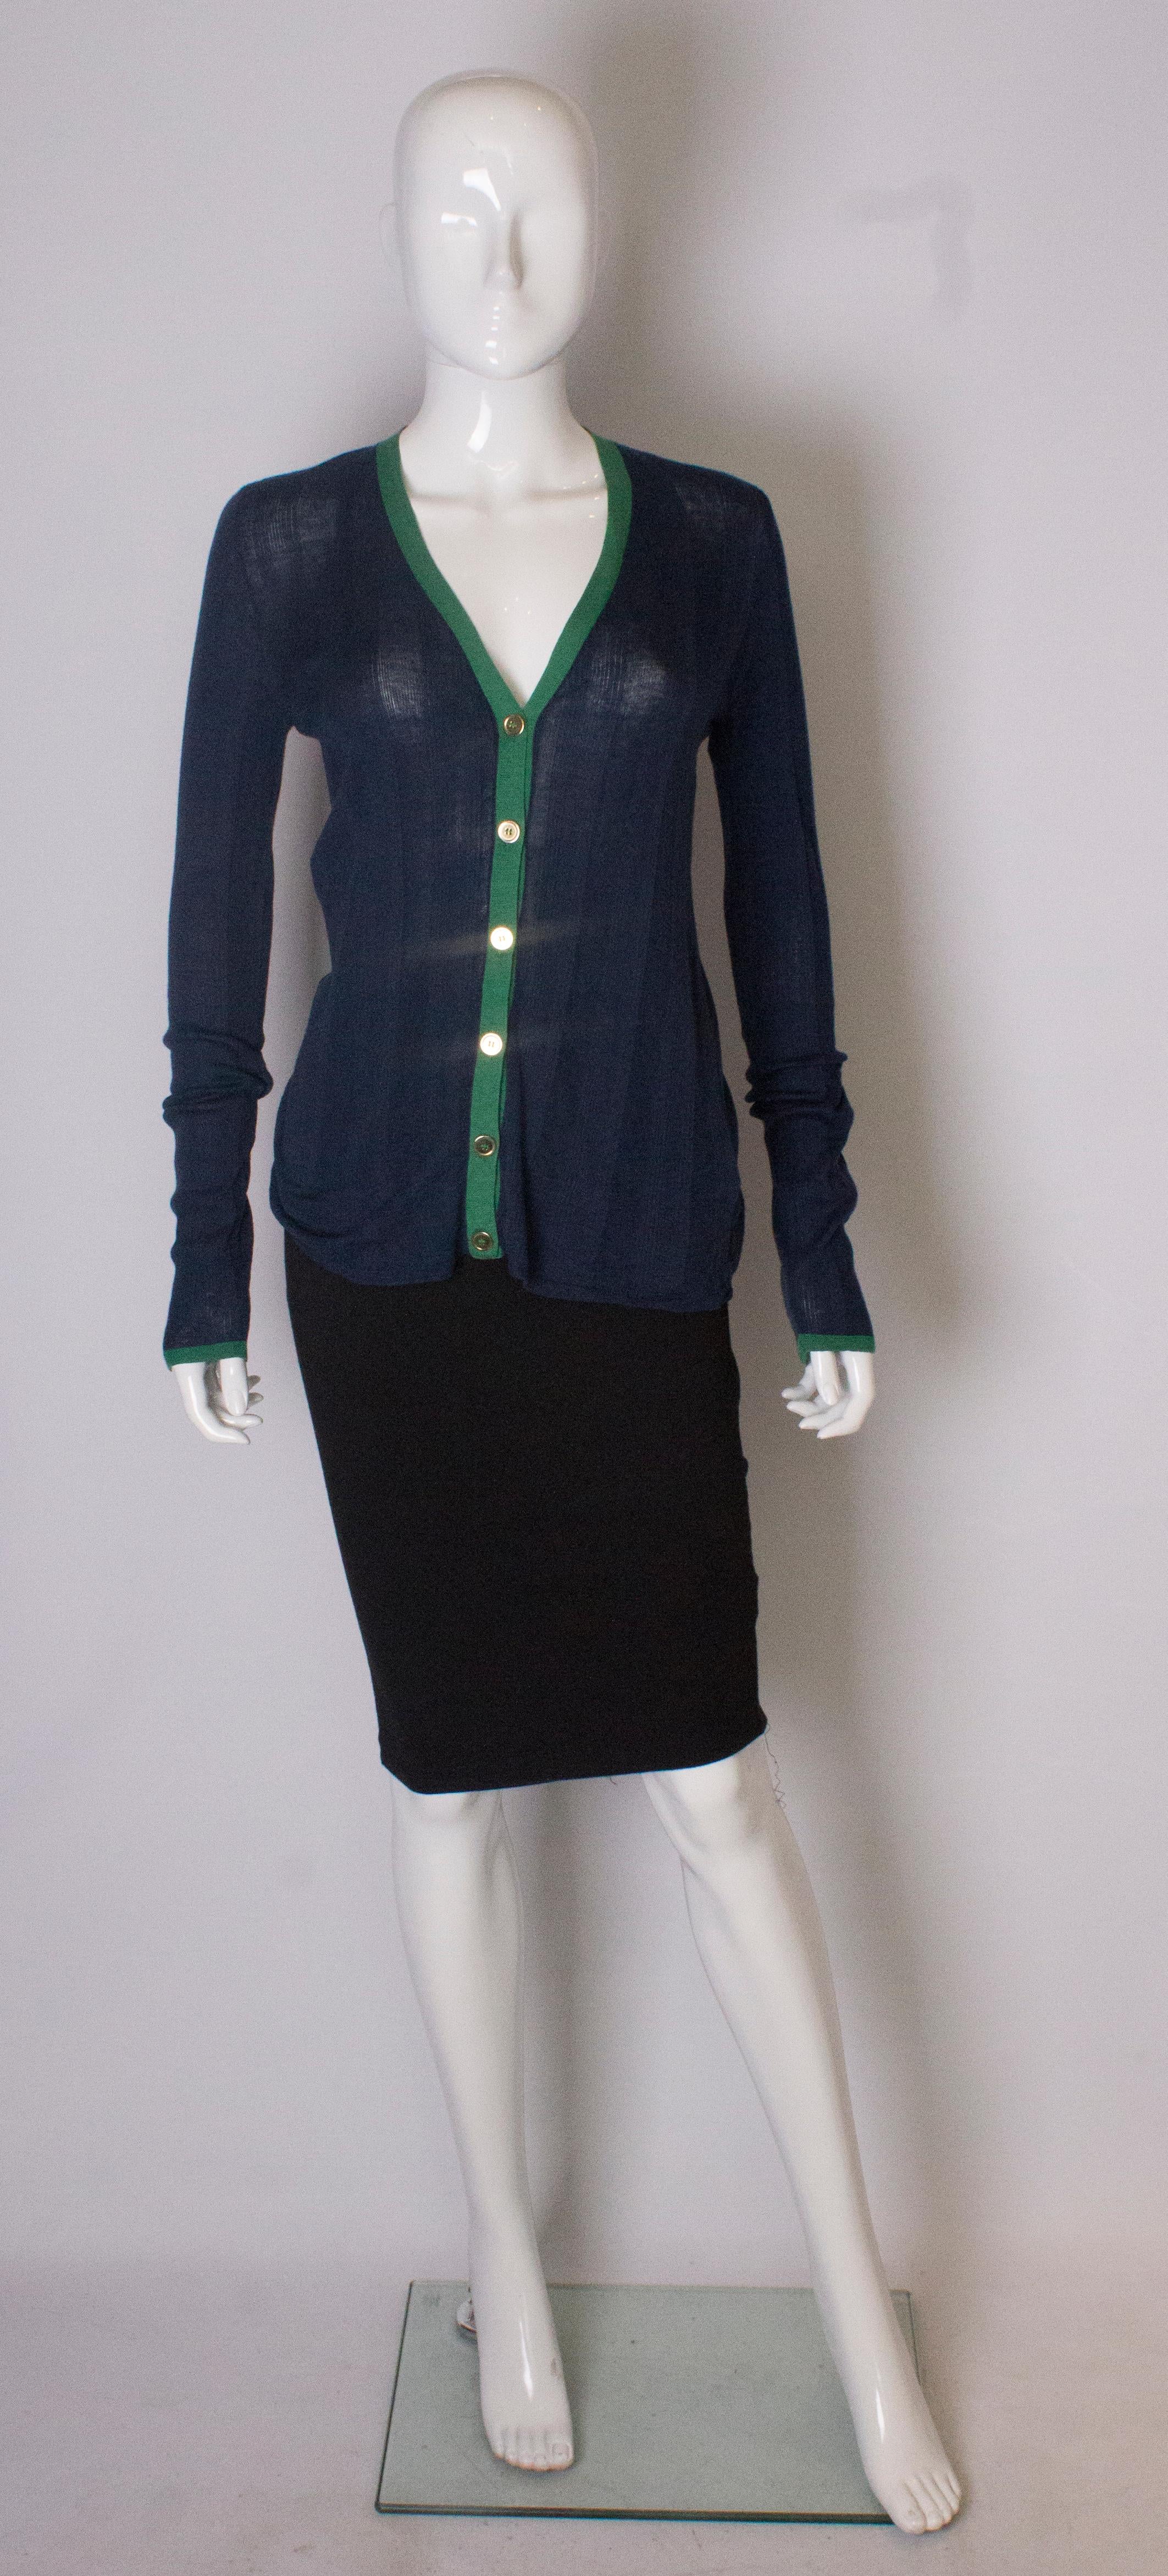 A chic and lightweight  by Yves Saint Laurent. The cardigan is 53% silk, 42% cotton, and 5% cashmere, and an ideal wieght for Summer .The cardigan is in a great shade of blue with green trim around the neckline and cuffs. It has a 6 button opening